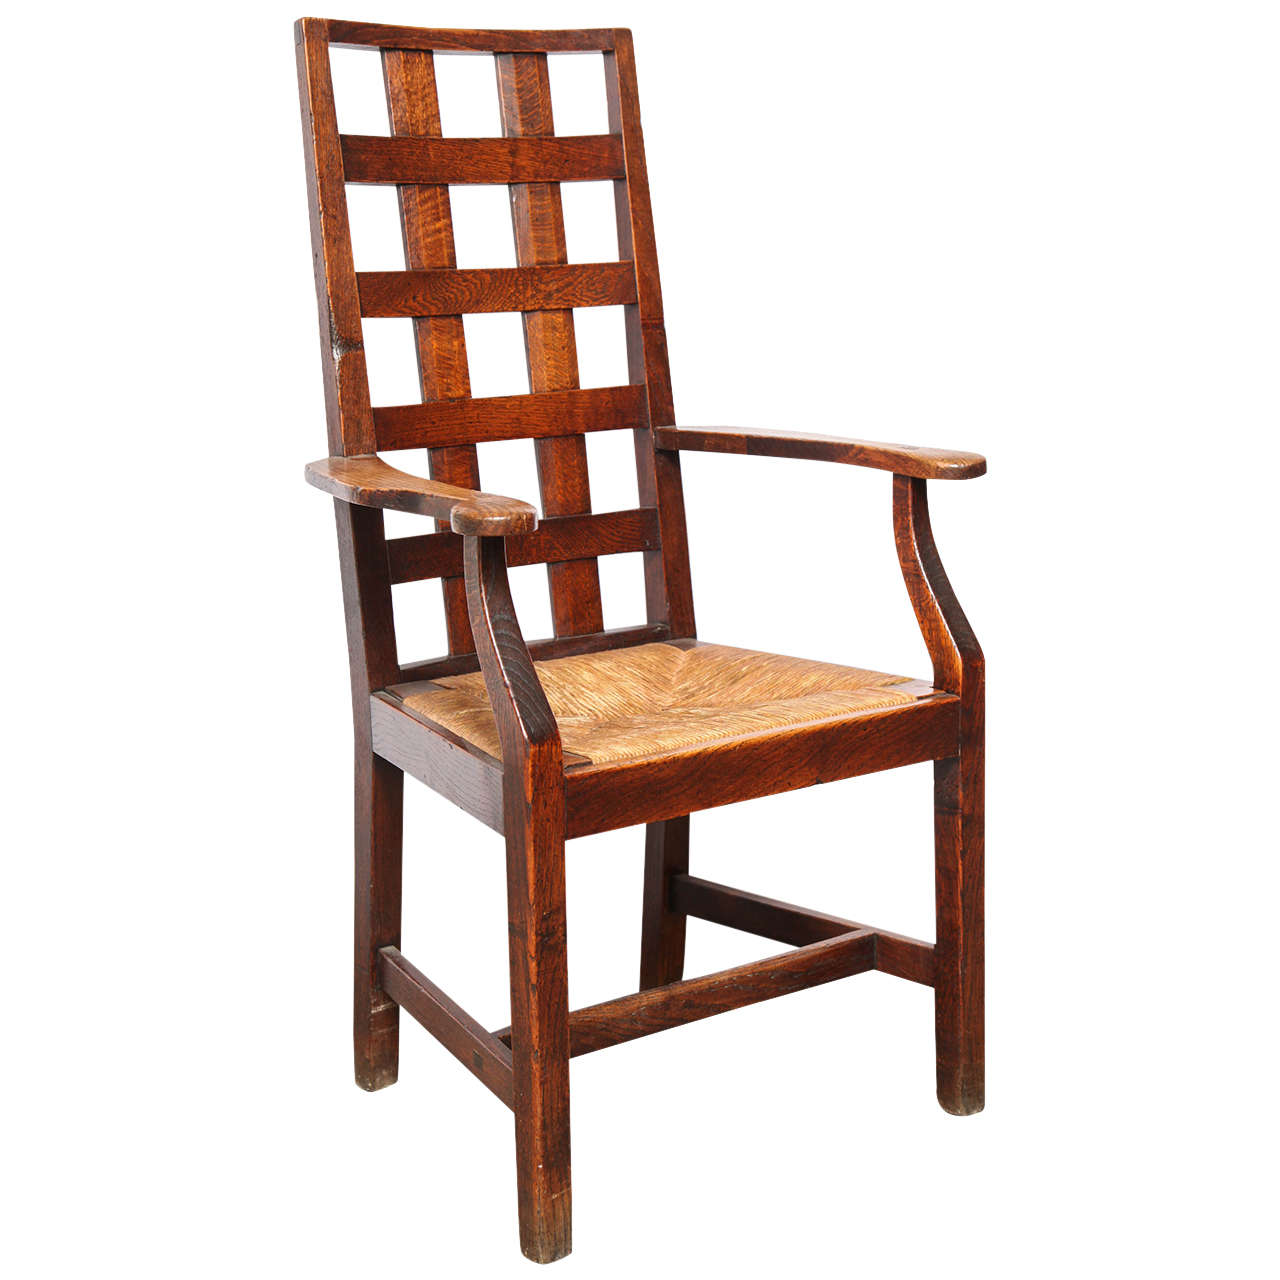 Lattice-Backed Chair with Rush Seat